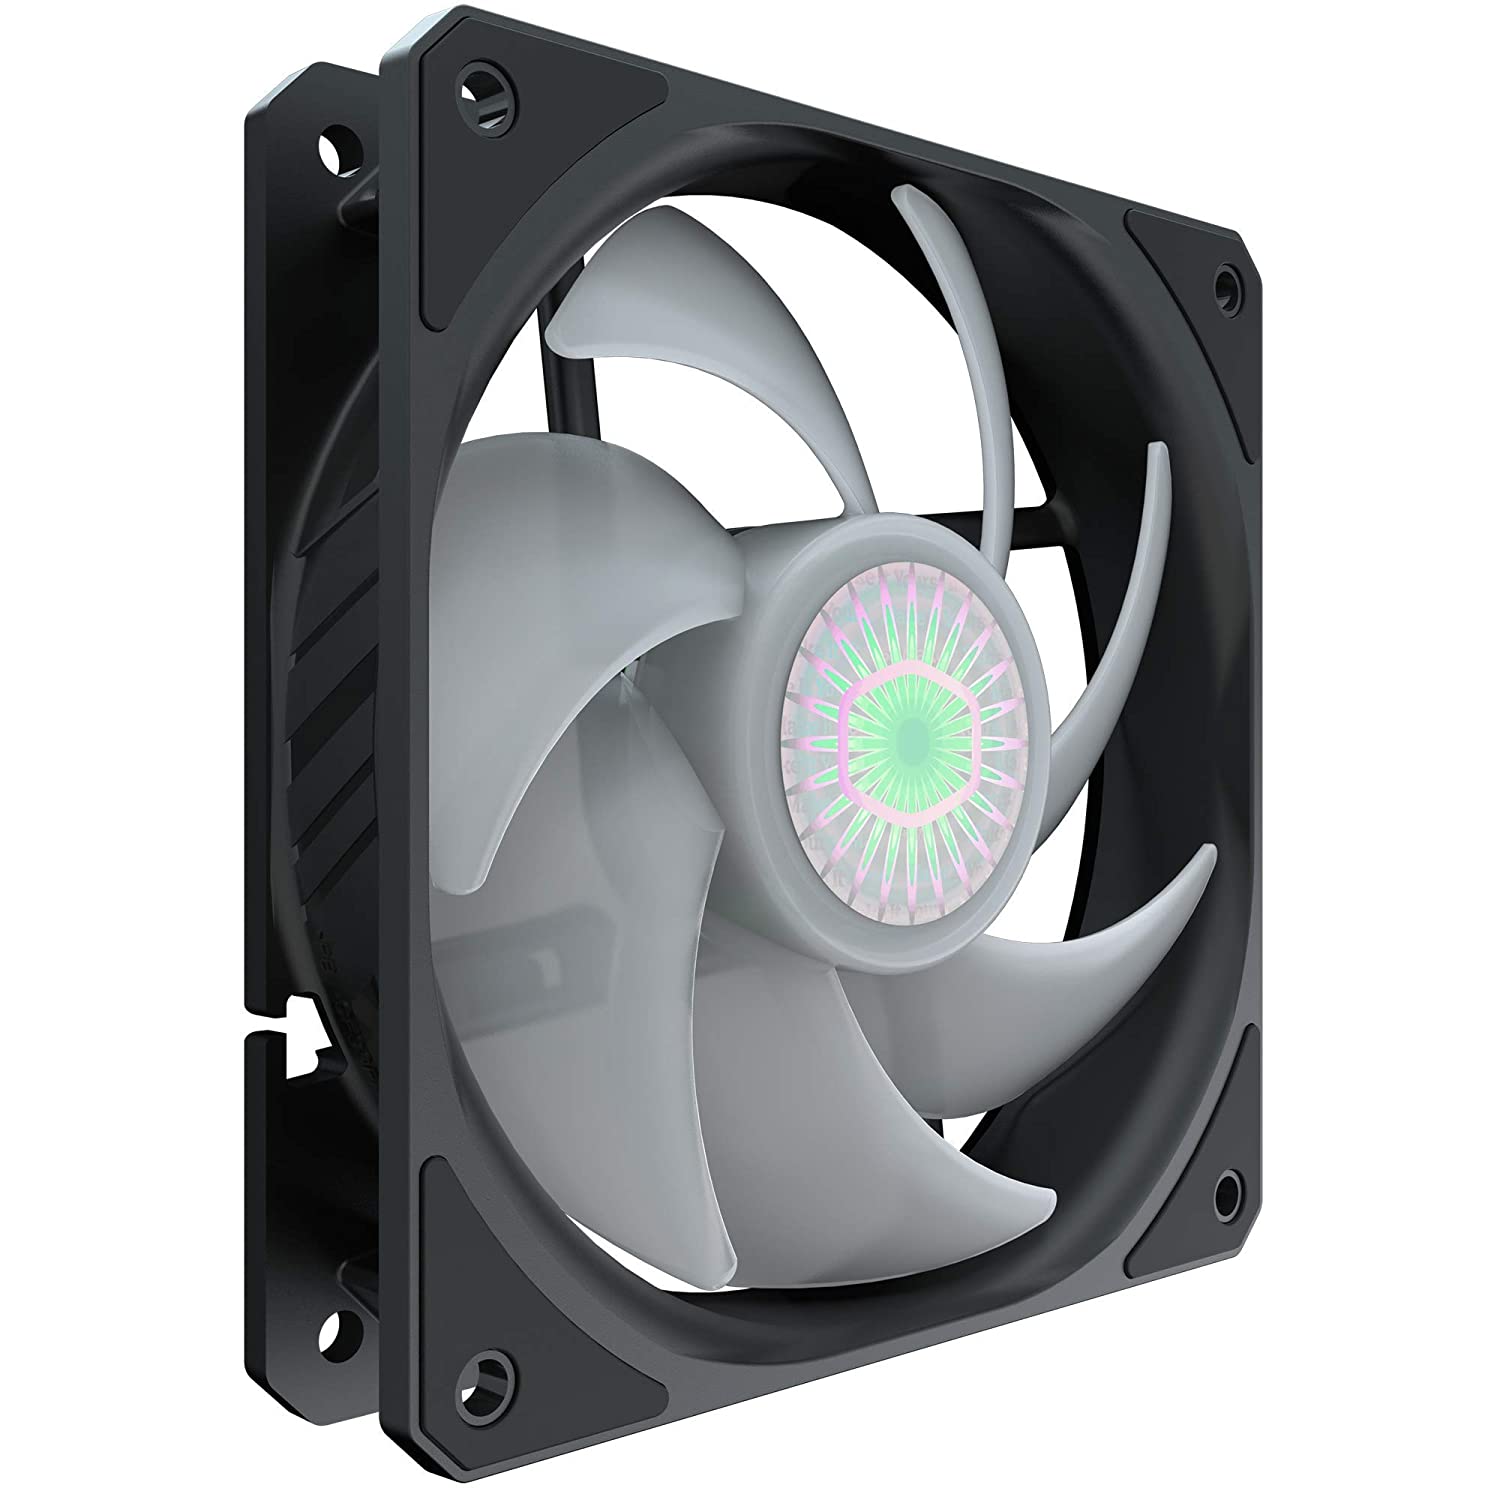 Cooler Master SickleFlow 120 RGB Square Frame Fan with Customizable LEDs, Air Balance Curve Blade Design, Sealed Bearing, PWM Control for Computer Case & Liquid Radiator